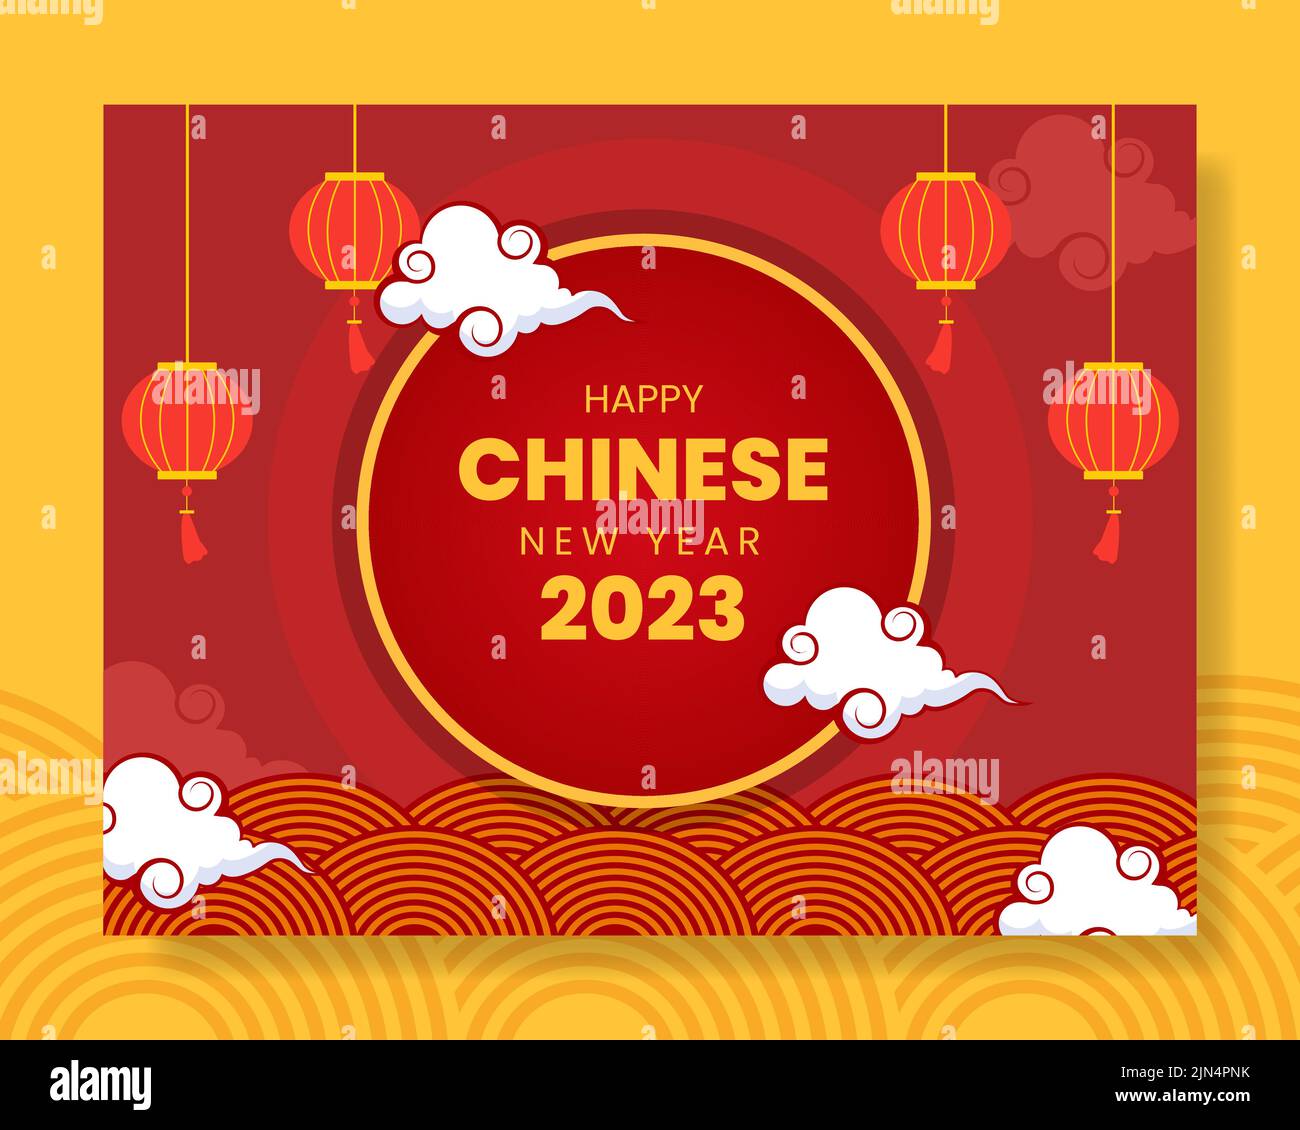 Happy Chinese New Year Photocall Template dessin main dessin dessin dessin animé dessin animé dessin animé dessin animé Illustration de Vecteur